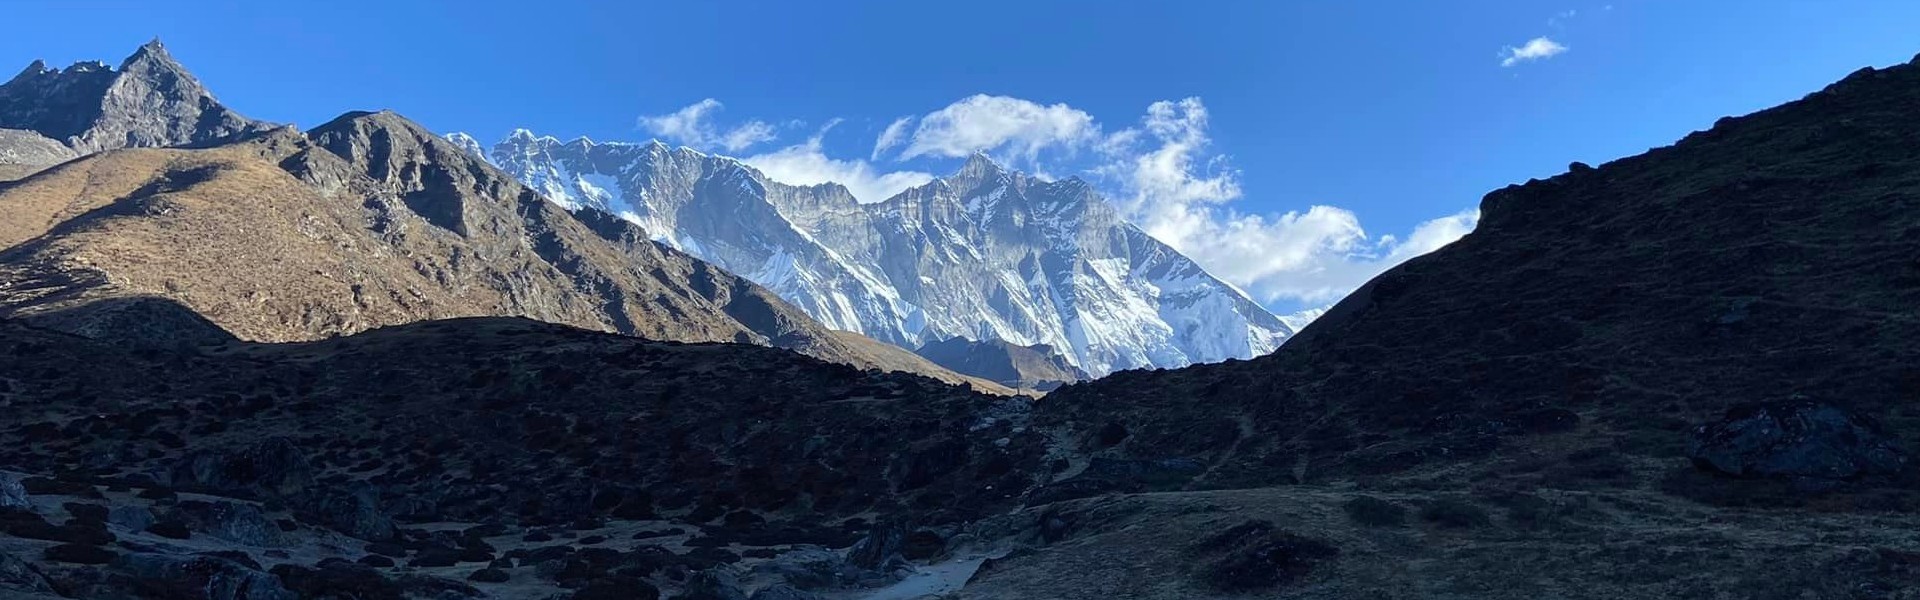 Top 6 Trekking & Tour Packages in Nepal for 2022/2023